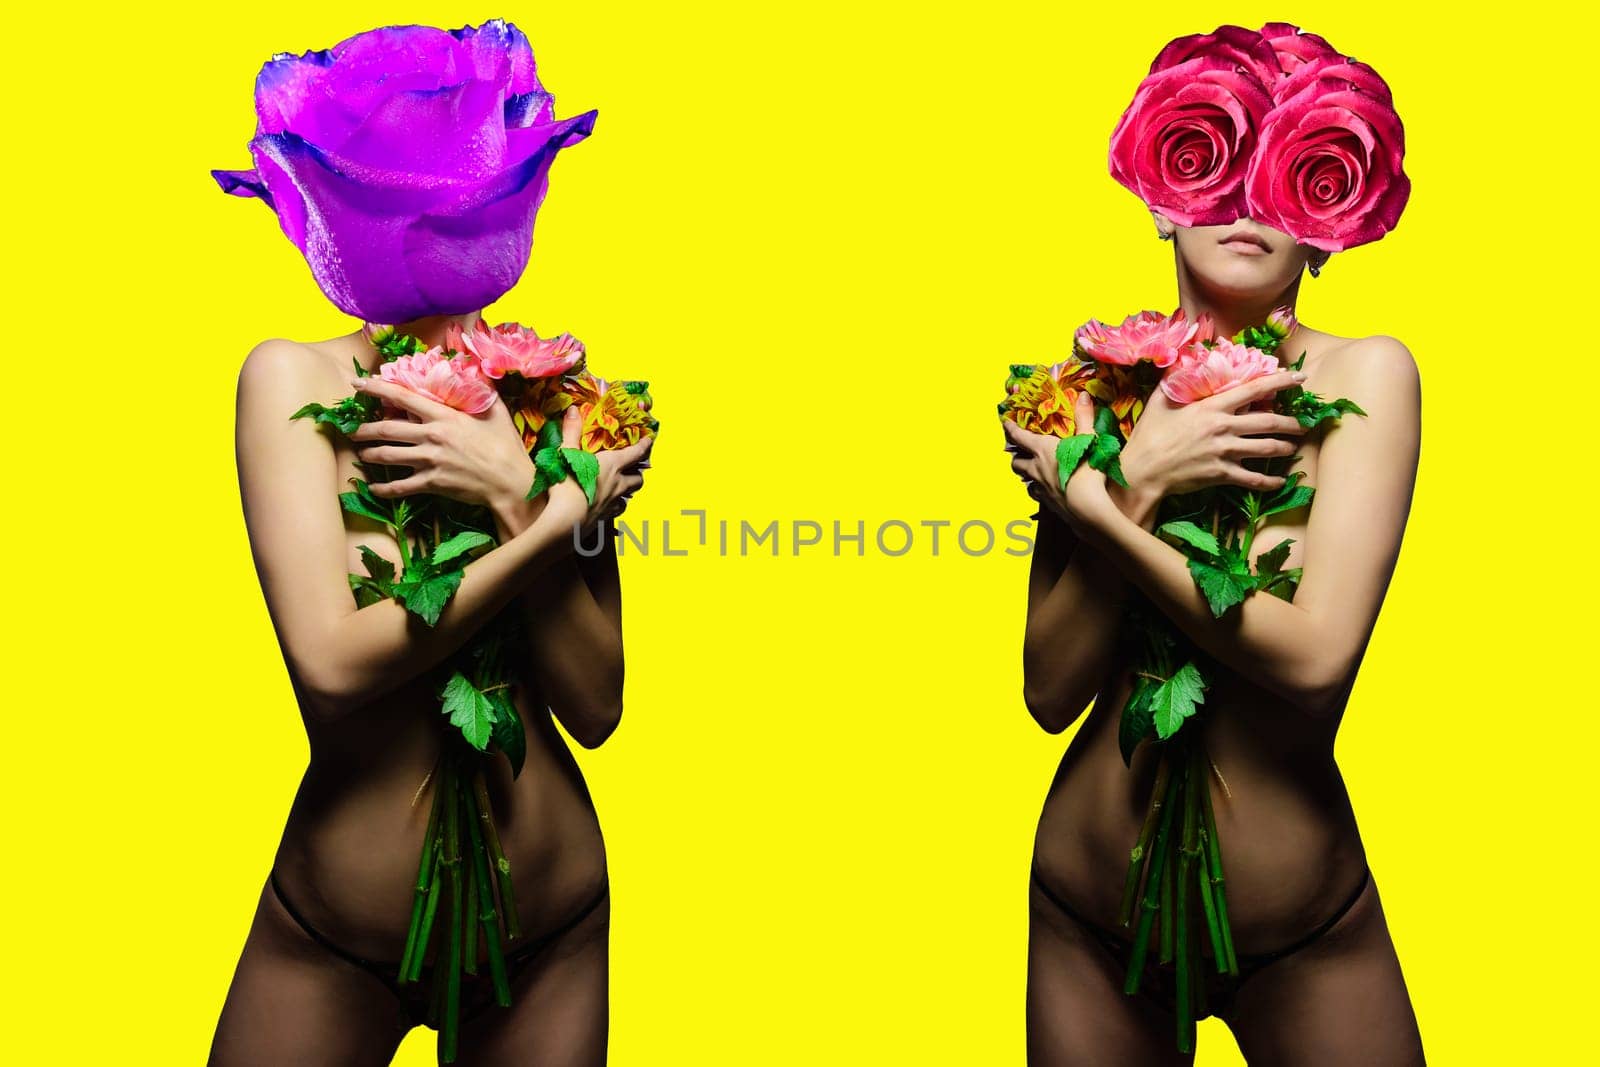 Abstract contemporary art collage beautiful young sexy sensual woman topless holding flowers on naked body with panties with flower rose bud on face. On a yellow background by zartarn